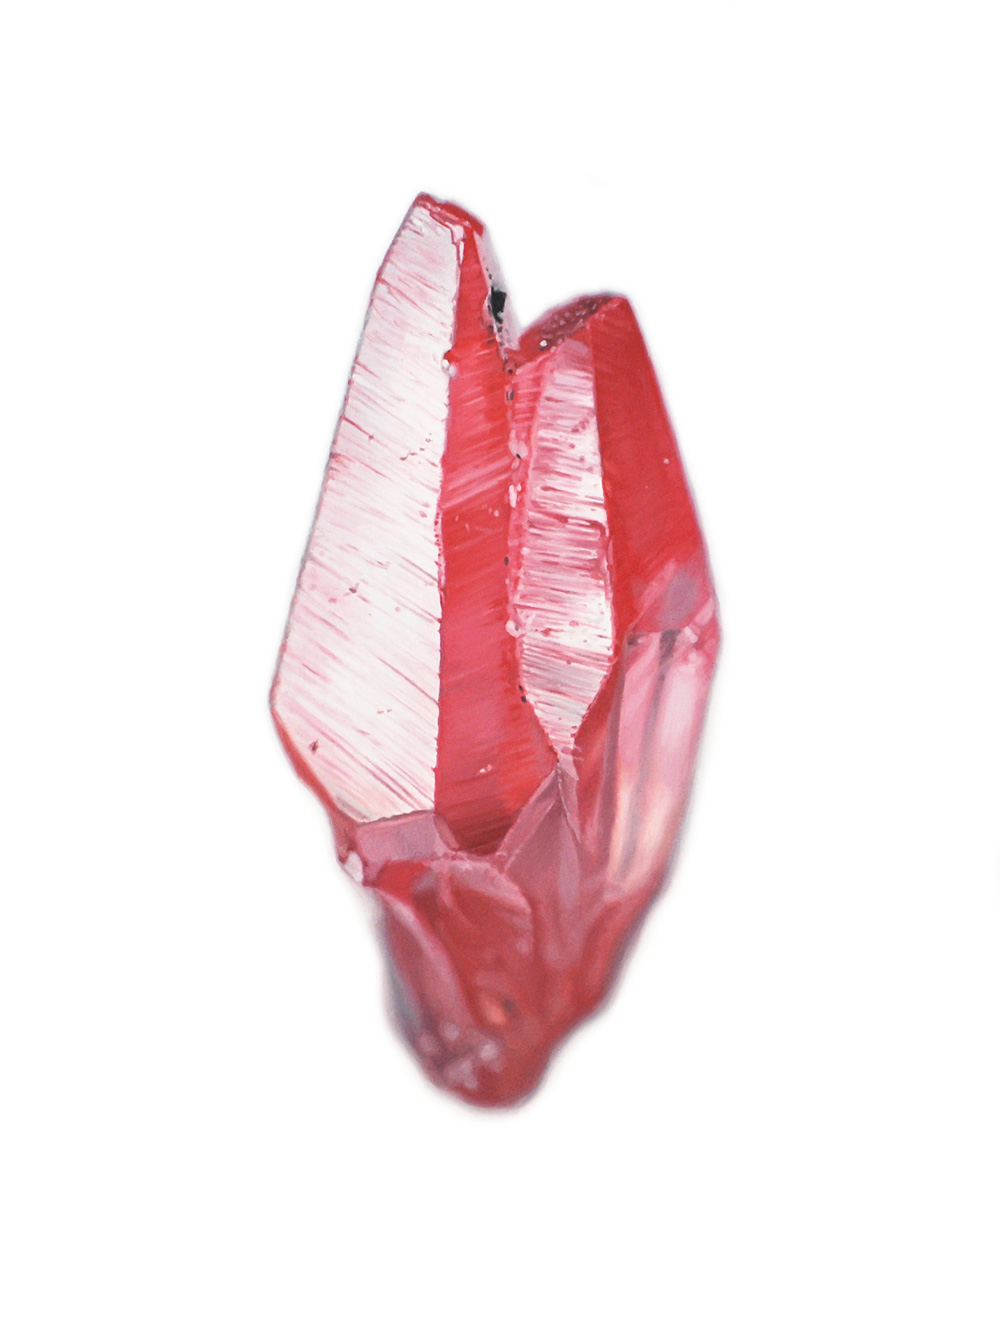 Hyper Realistic Paintings Of Crystals And Minerals By Carly Waito 3